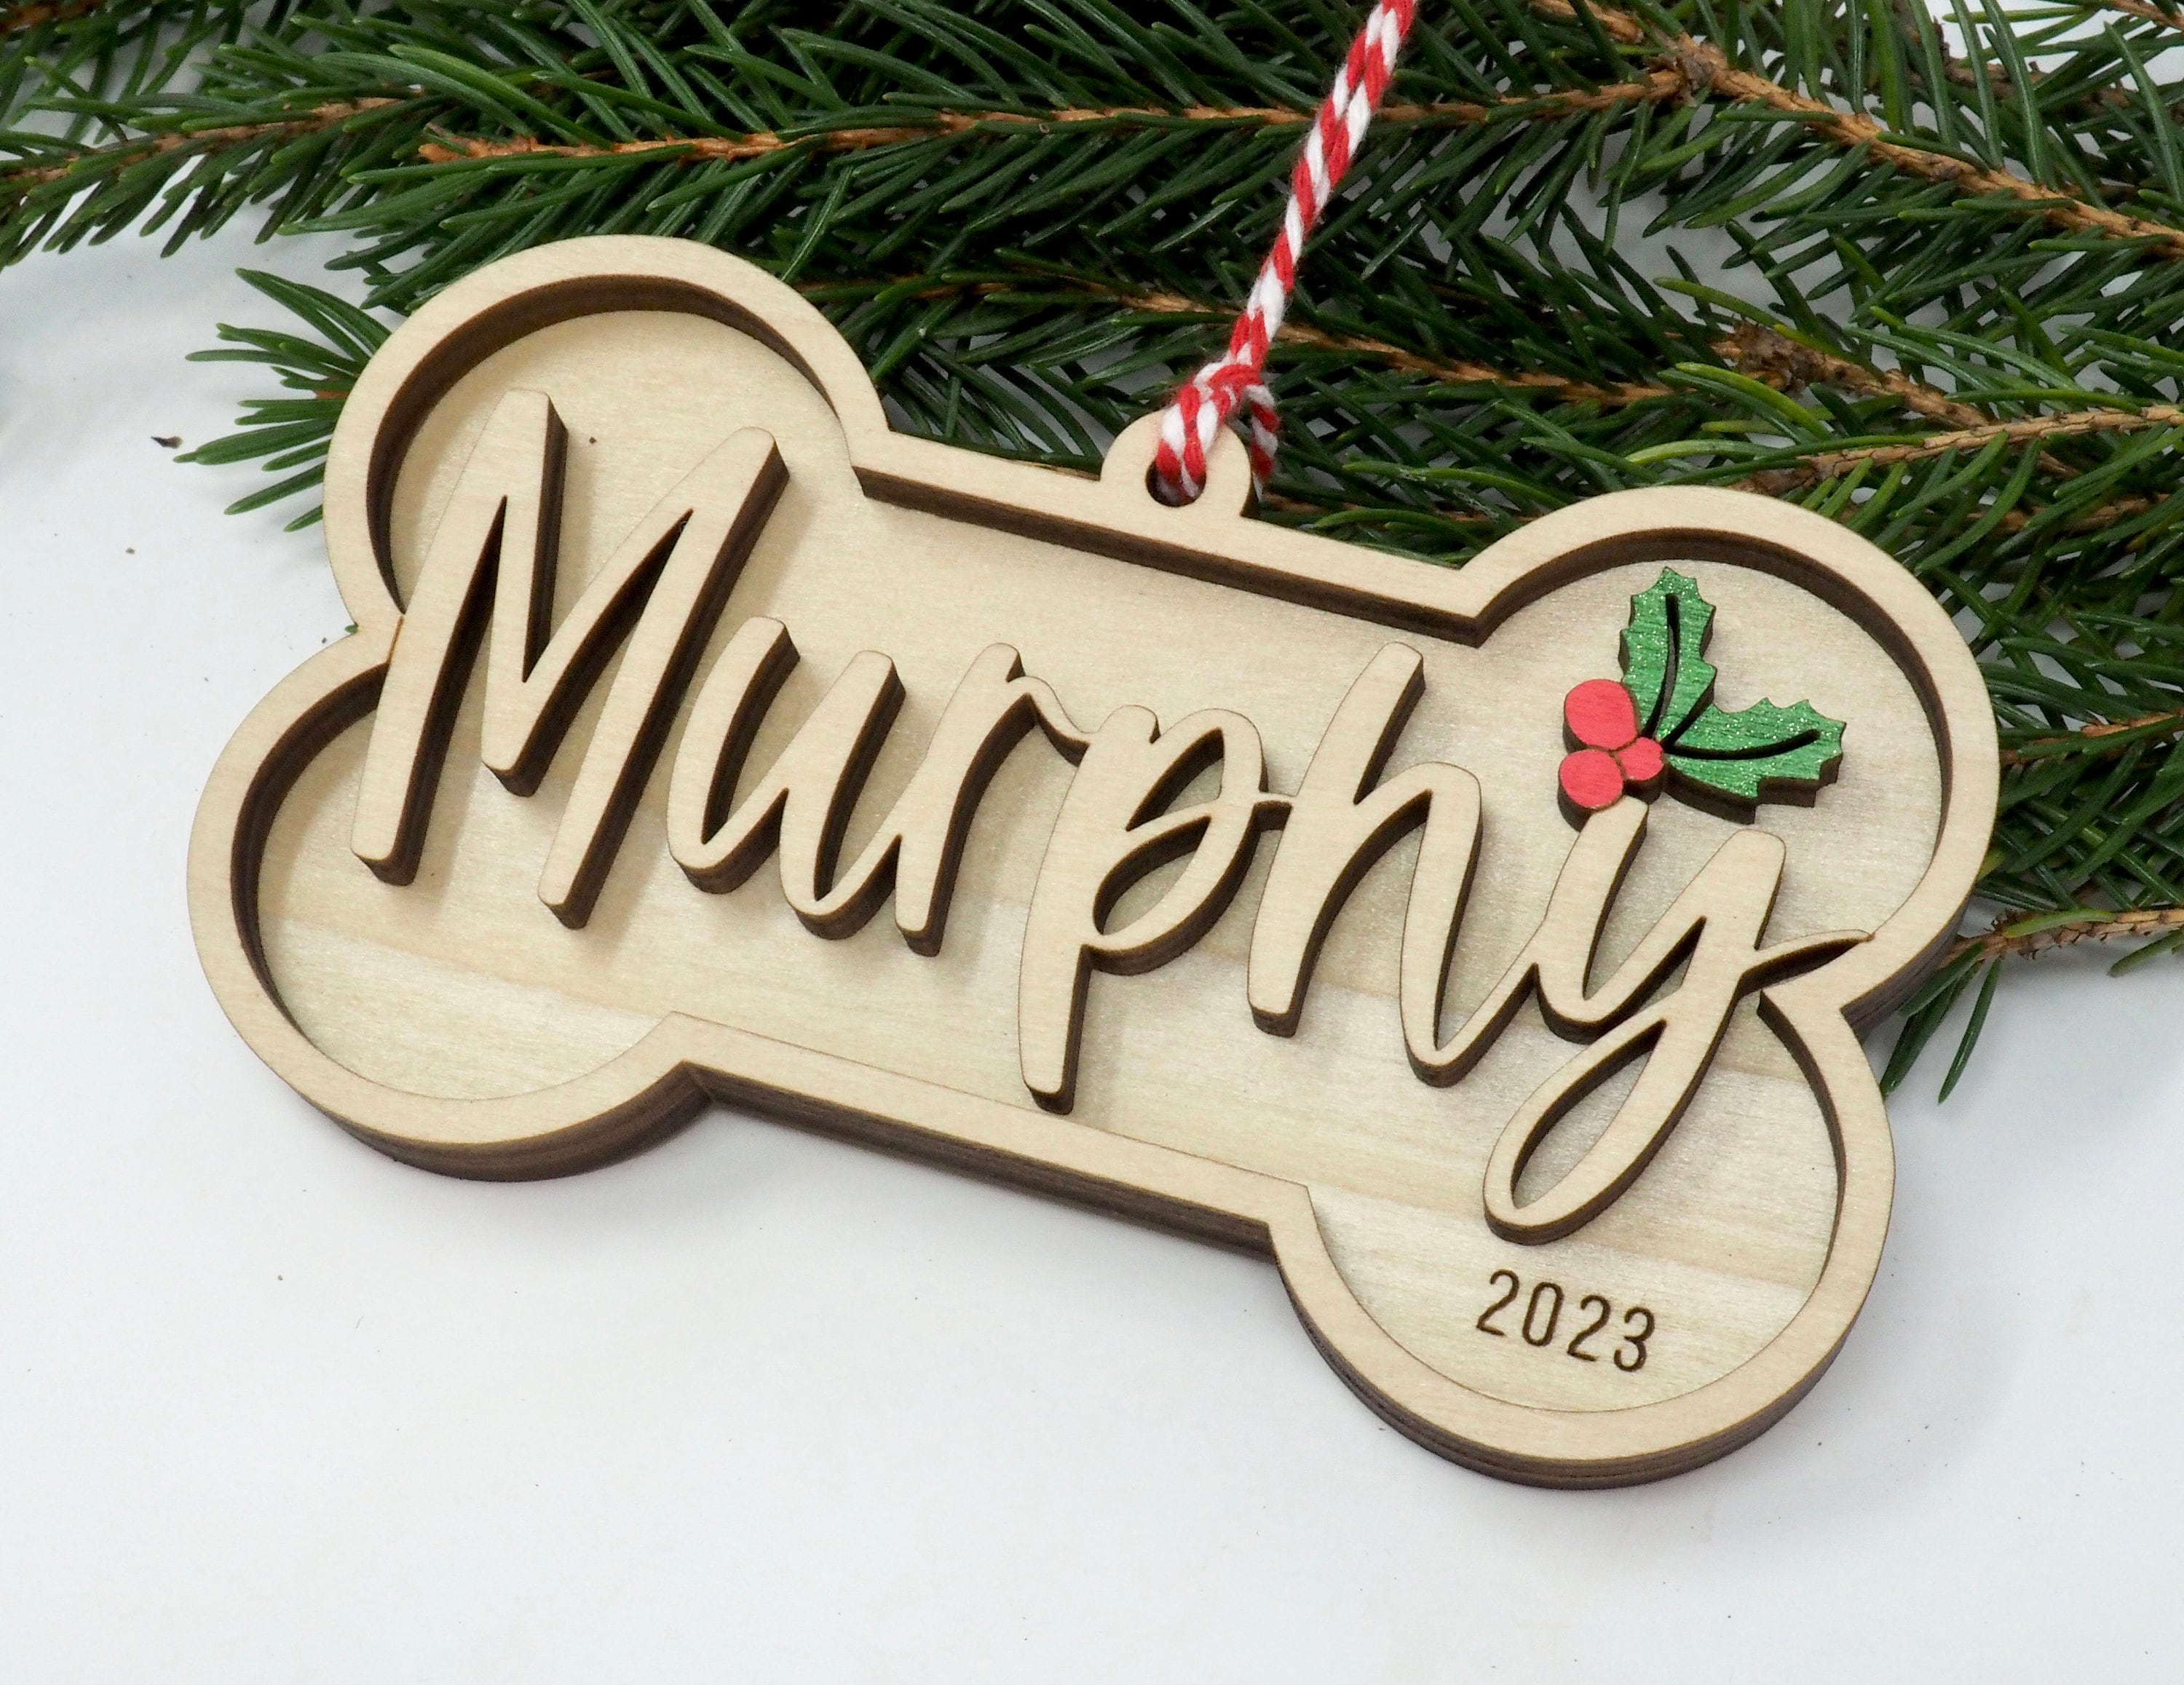 Personalized Dog Bone Christmas Ornament with Year 2023, Dog Ornament